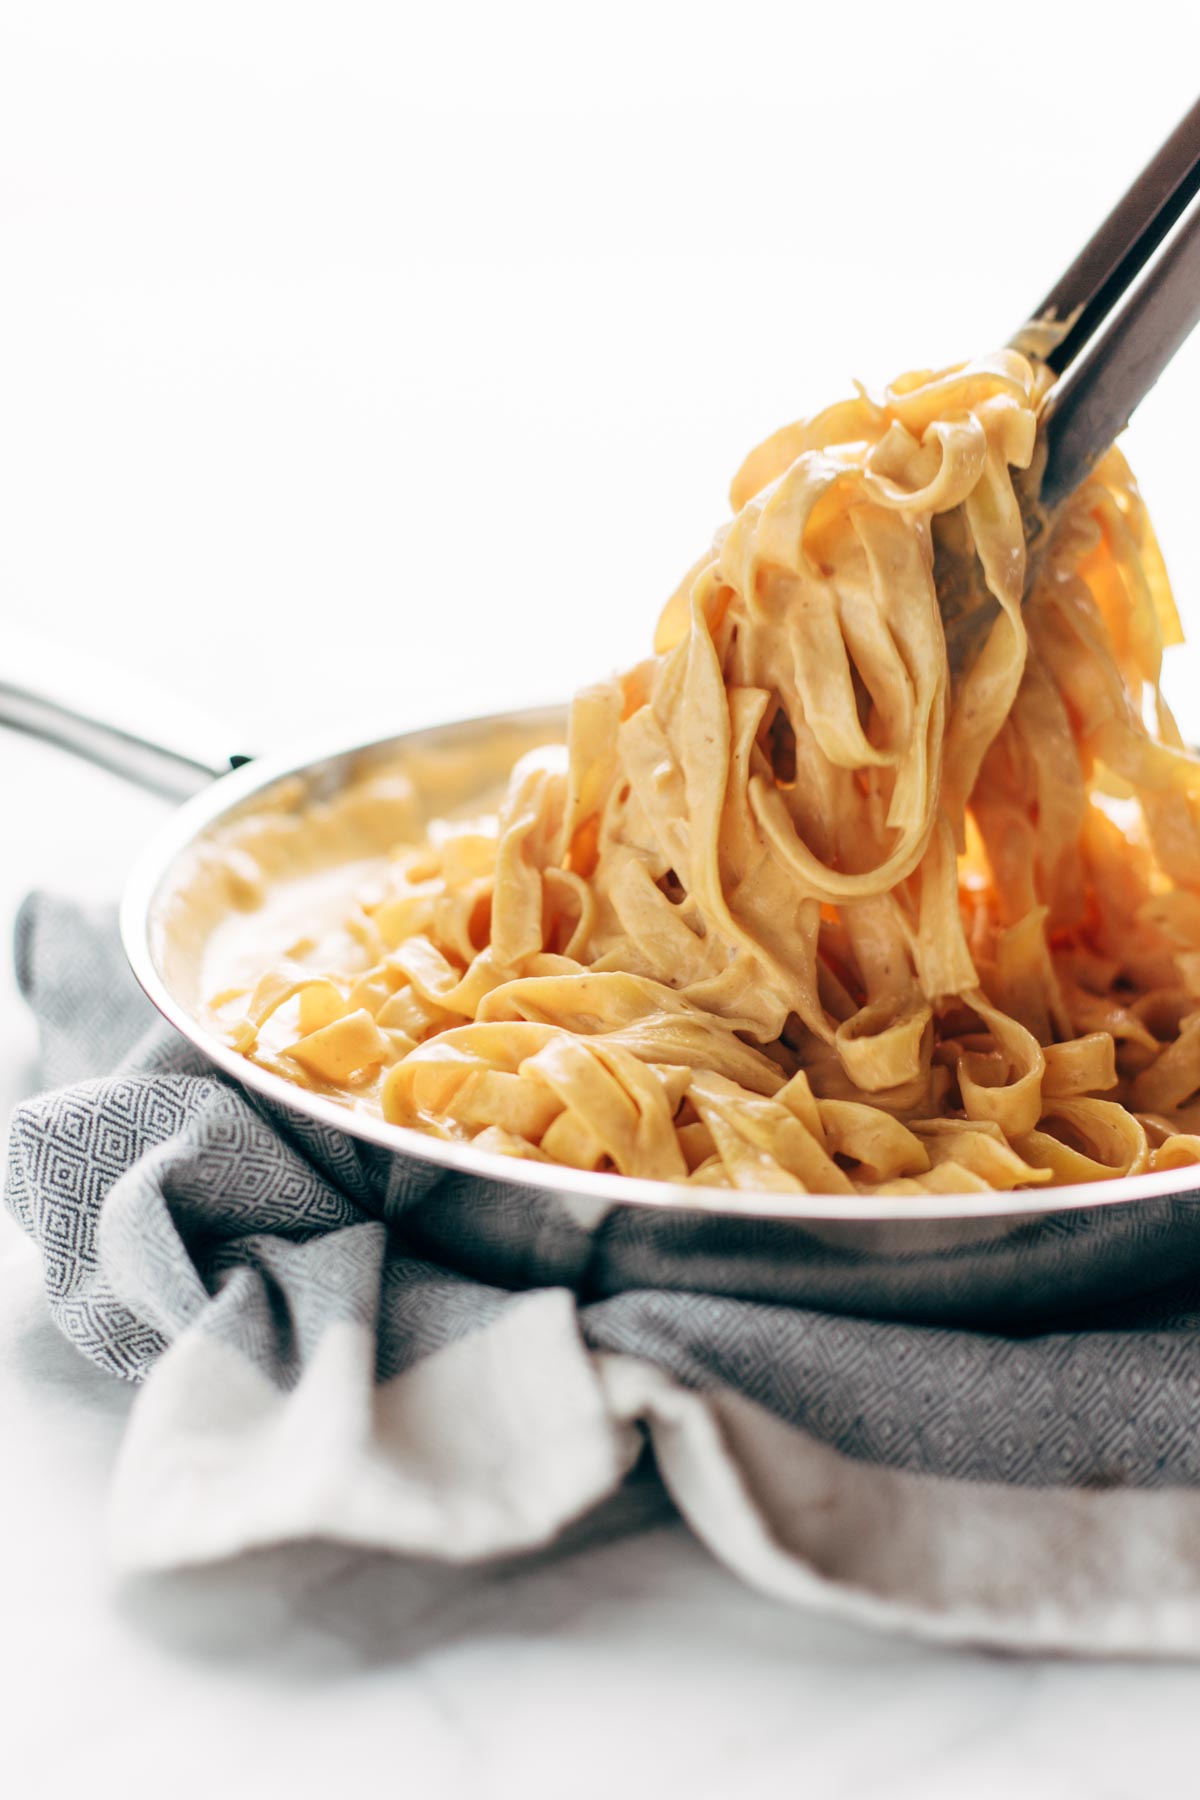 NoMad Luxuries Sunday pairings with pasta in a grey neutral kitchen for the fall